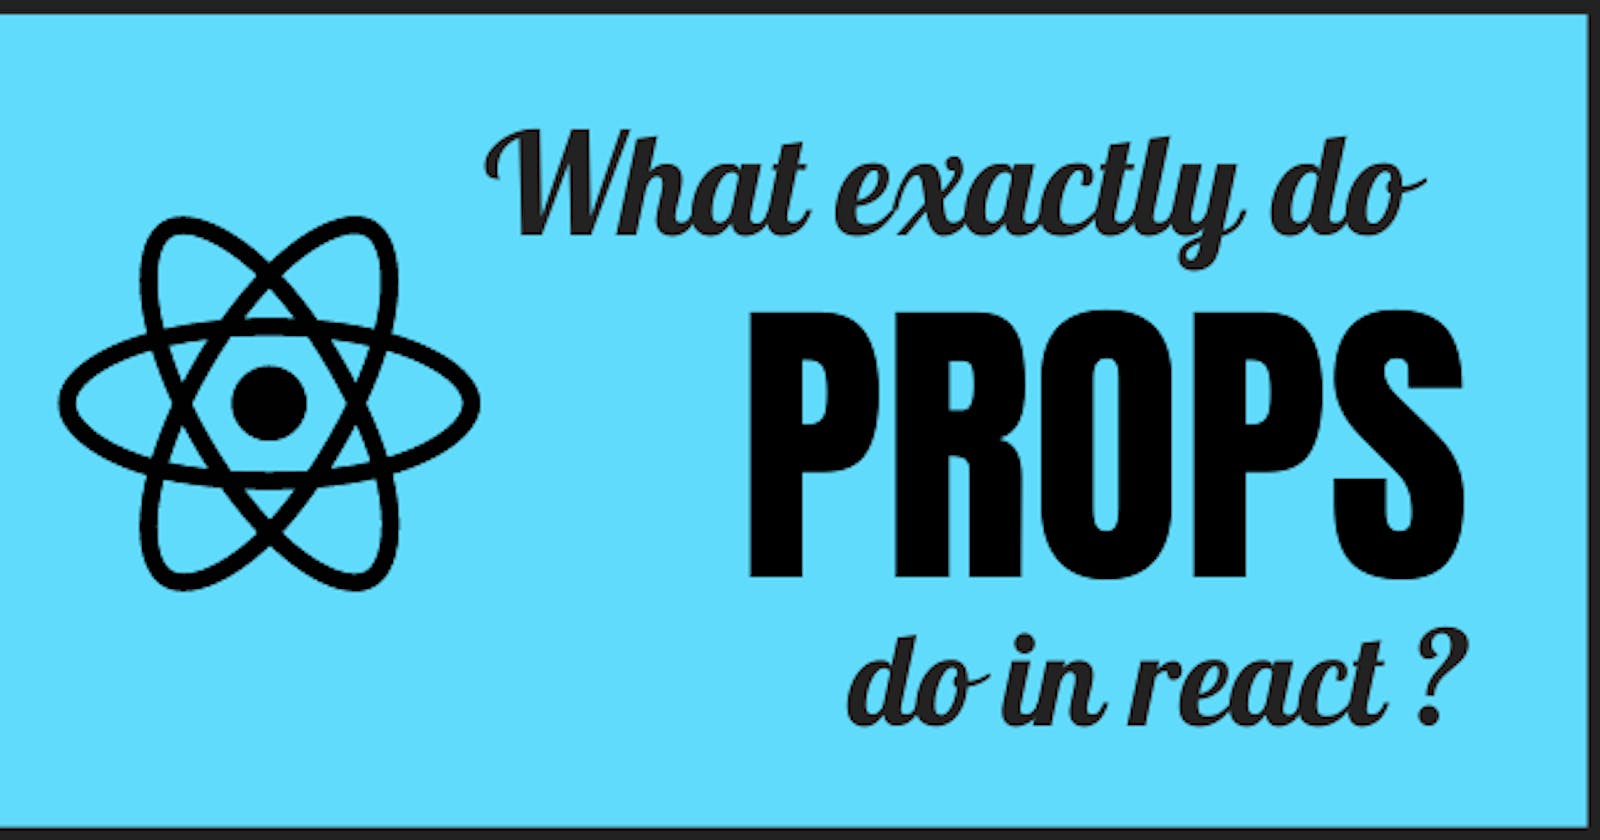 What exactly do props do in React?